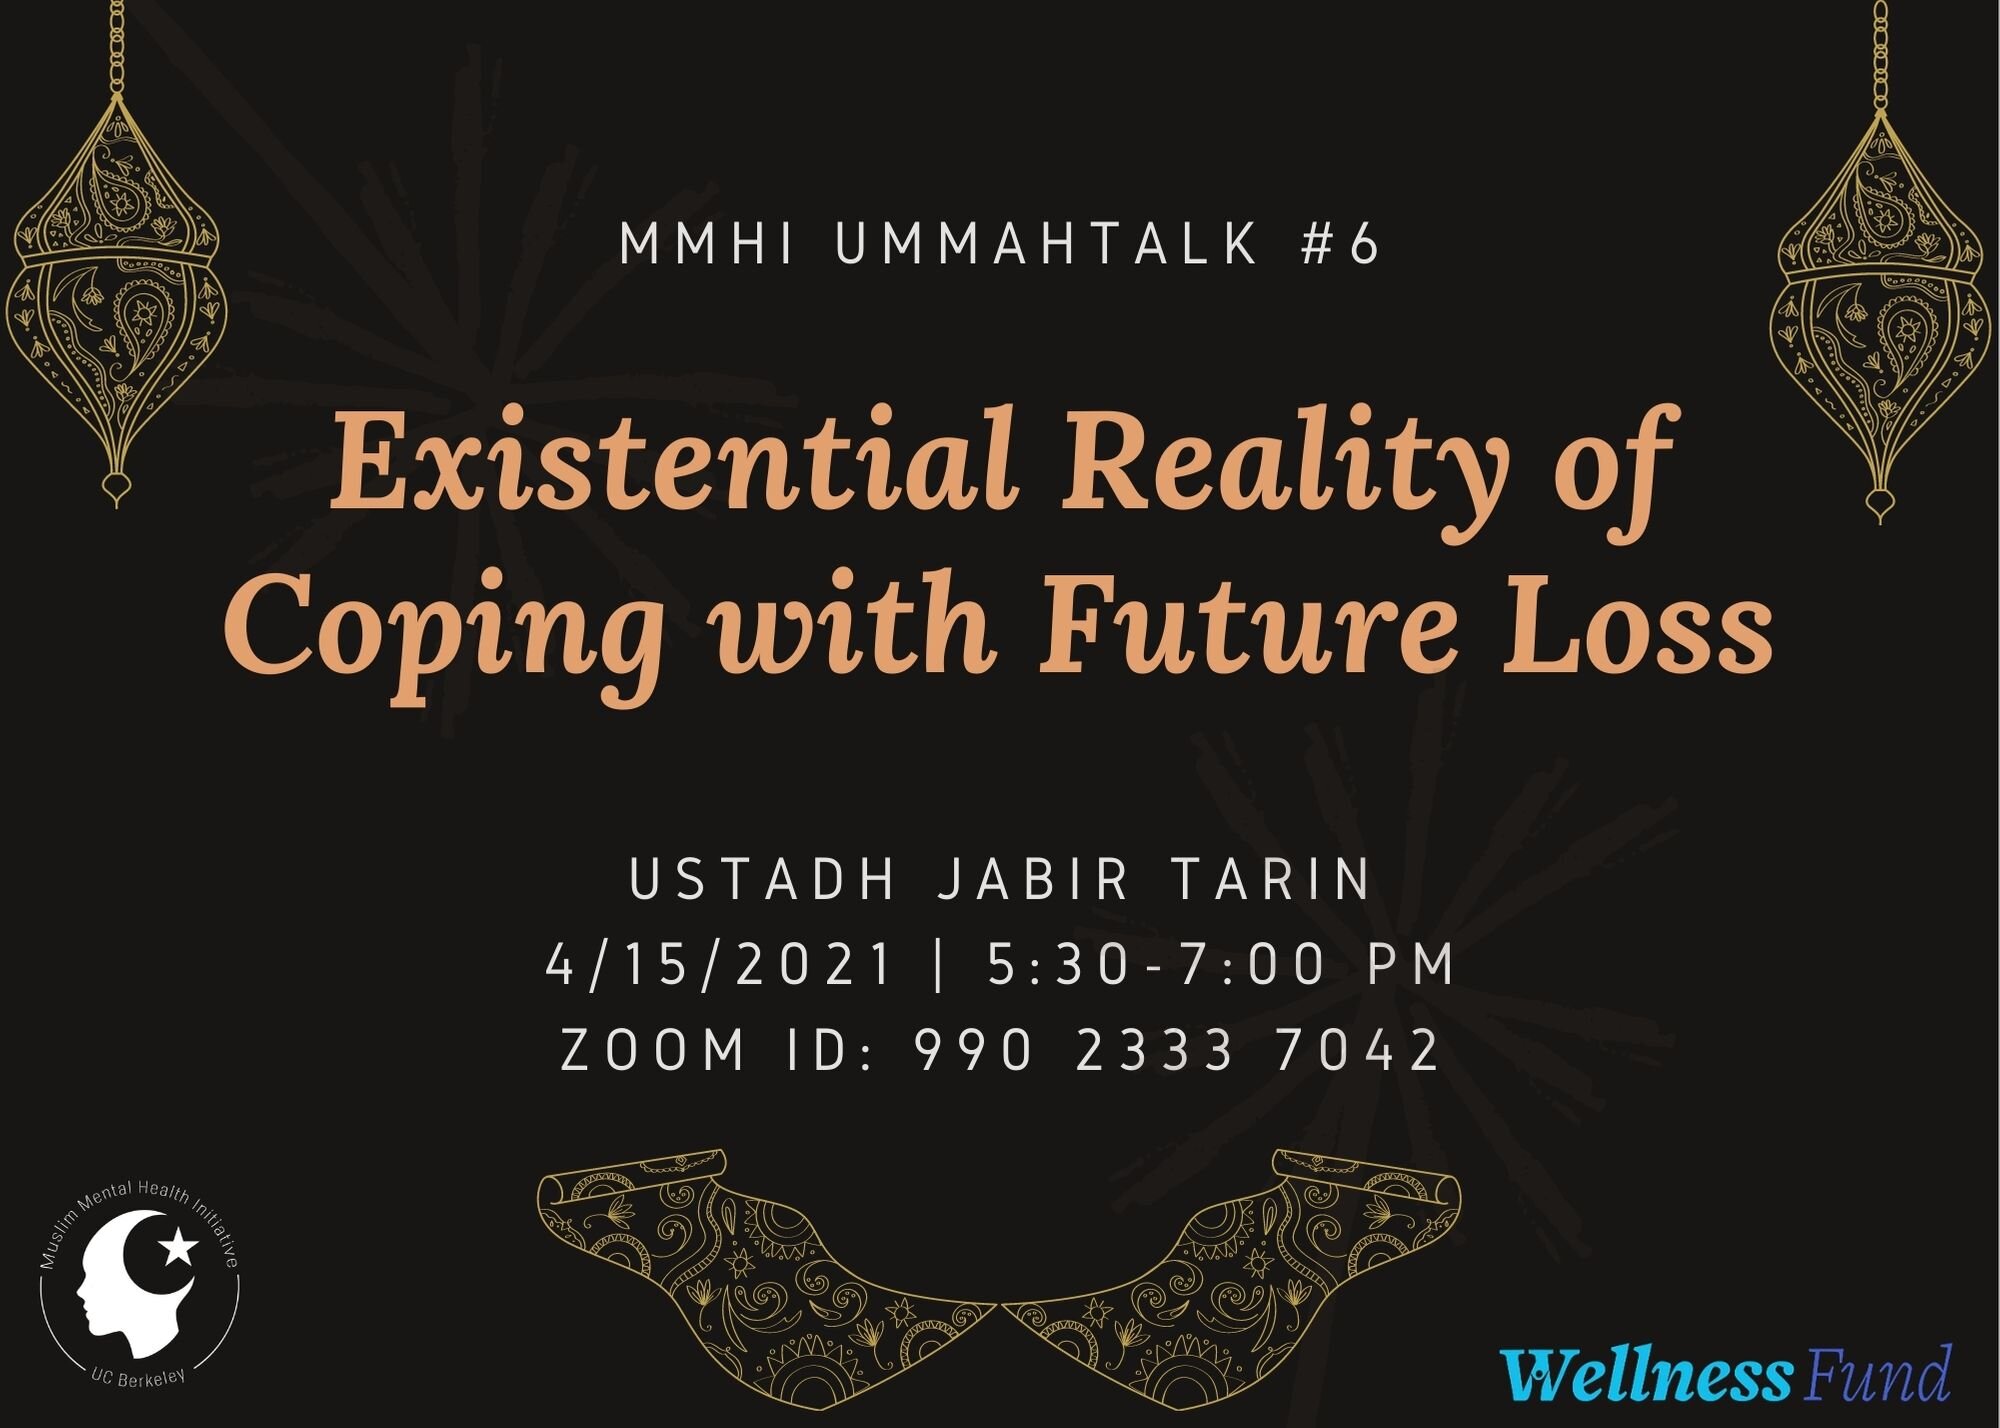 UmmahTalk #6 - 4/15/21 Existential Reality of Coping with Future Loss